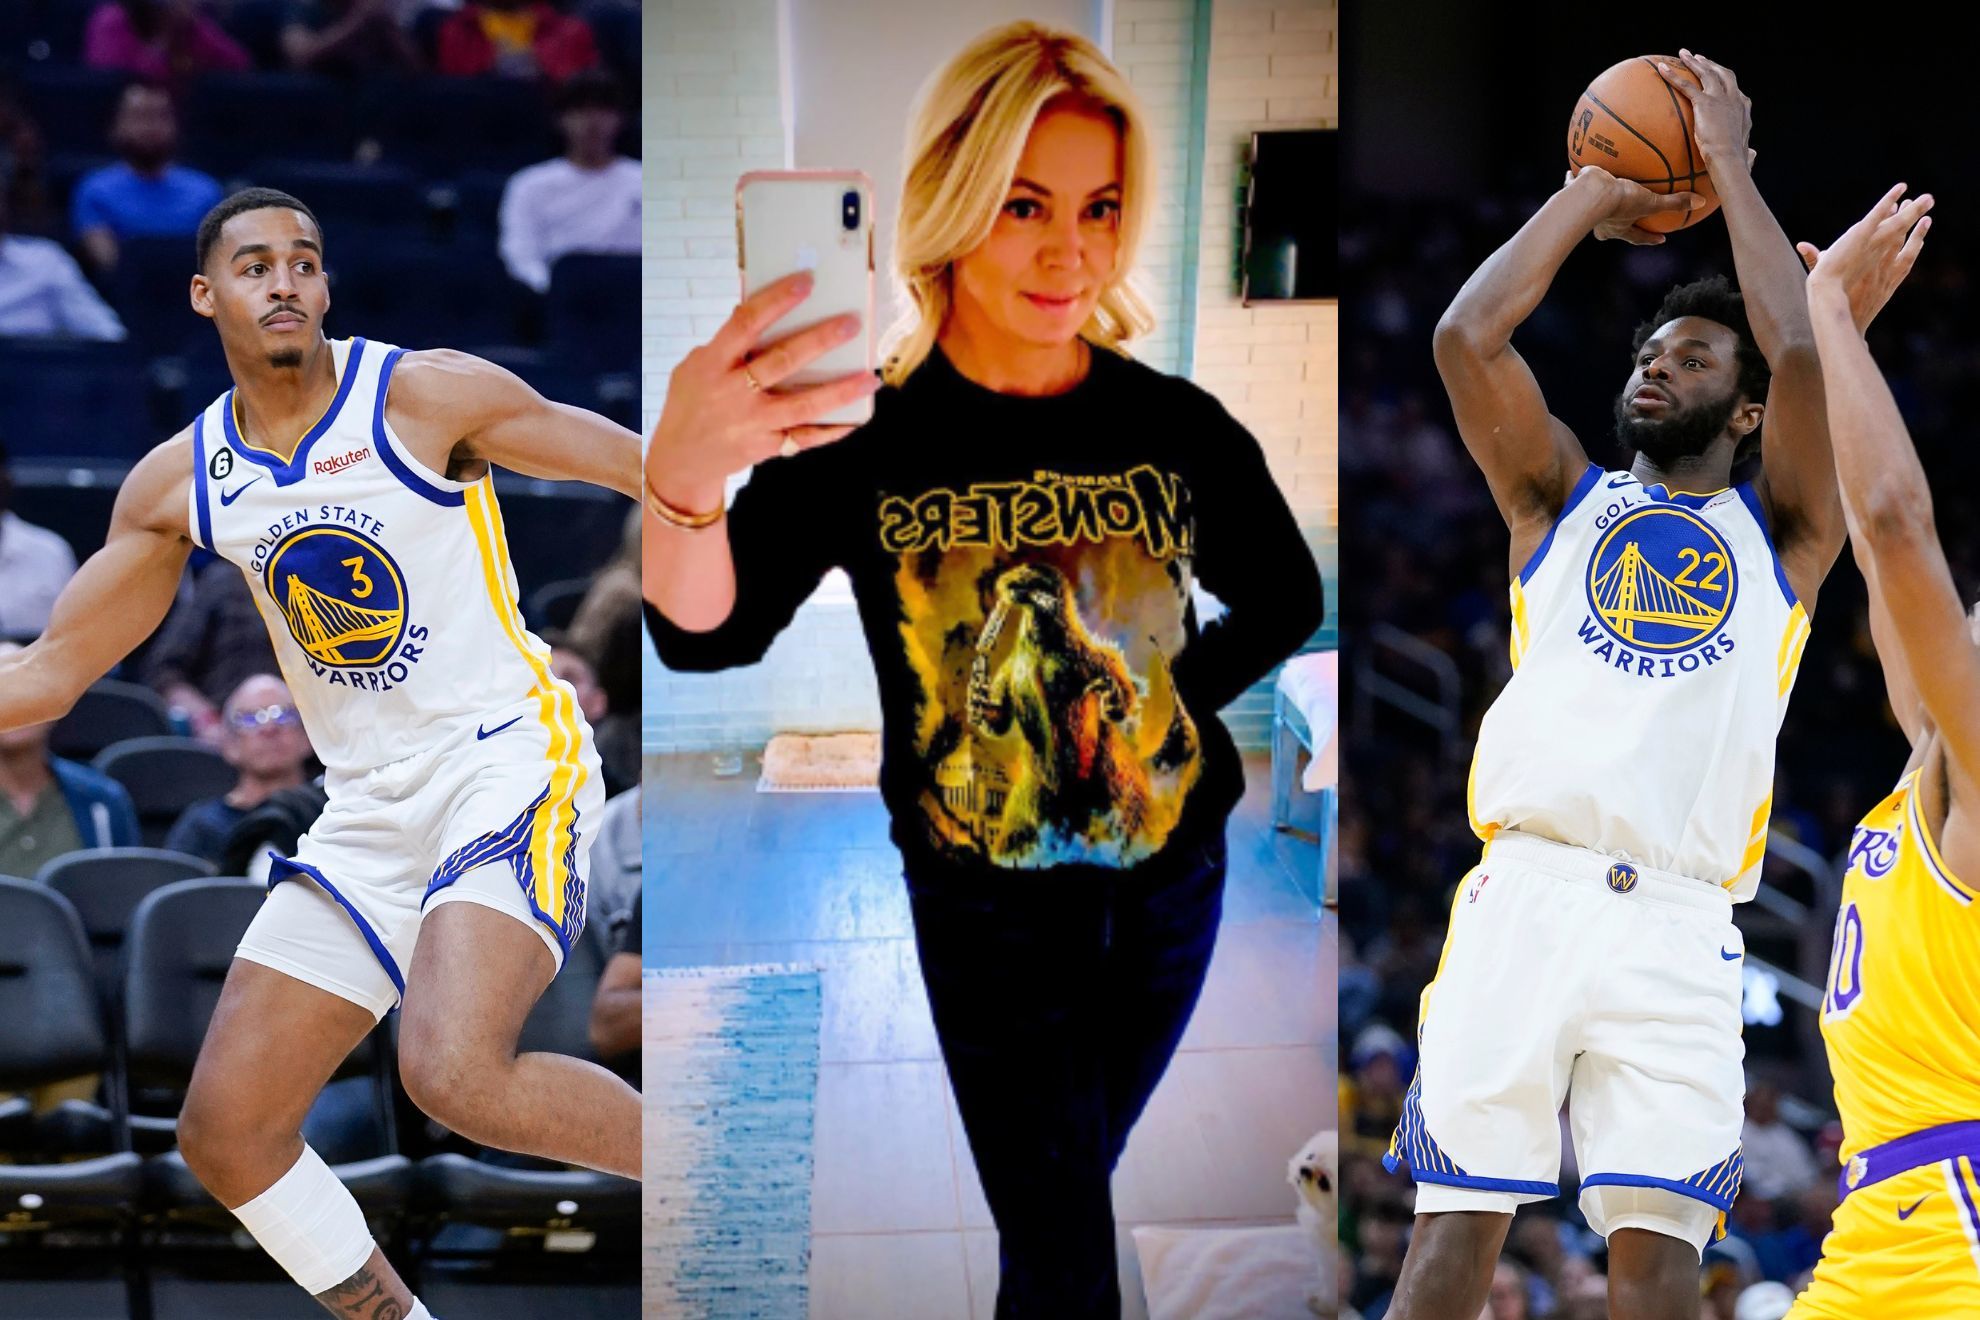 Jordan Poole (left) and Andrew Wiggins (right), Golden State Warriors / AP and Jeanie Buss, Los Angeles Lakers (middle) / @jeaniebuss - Instagram